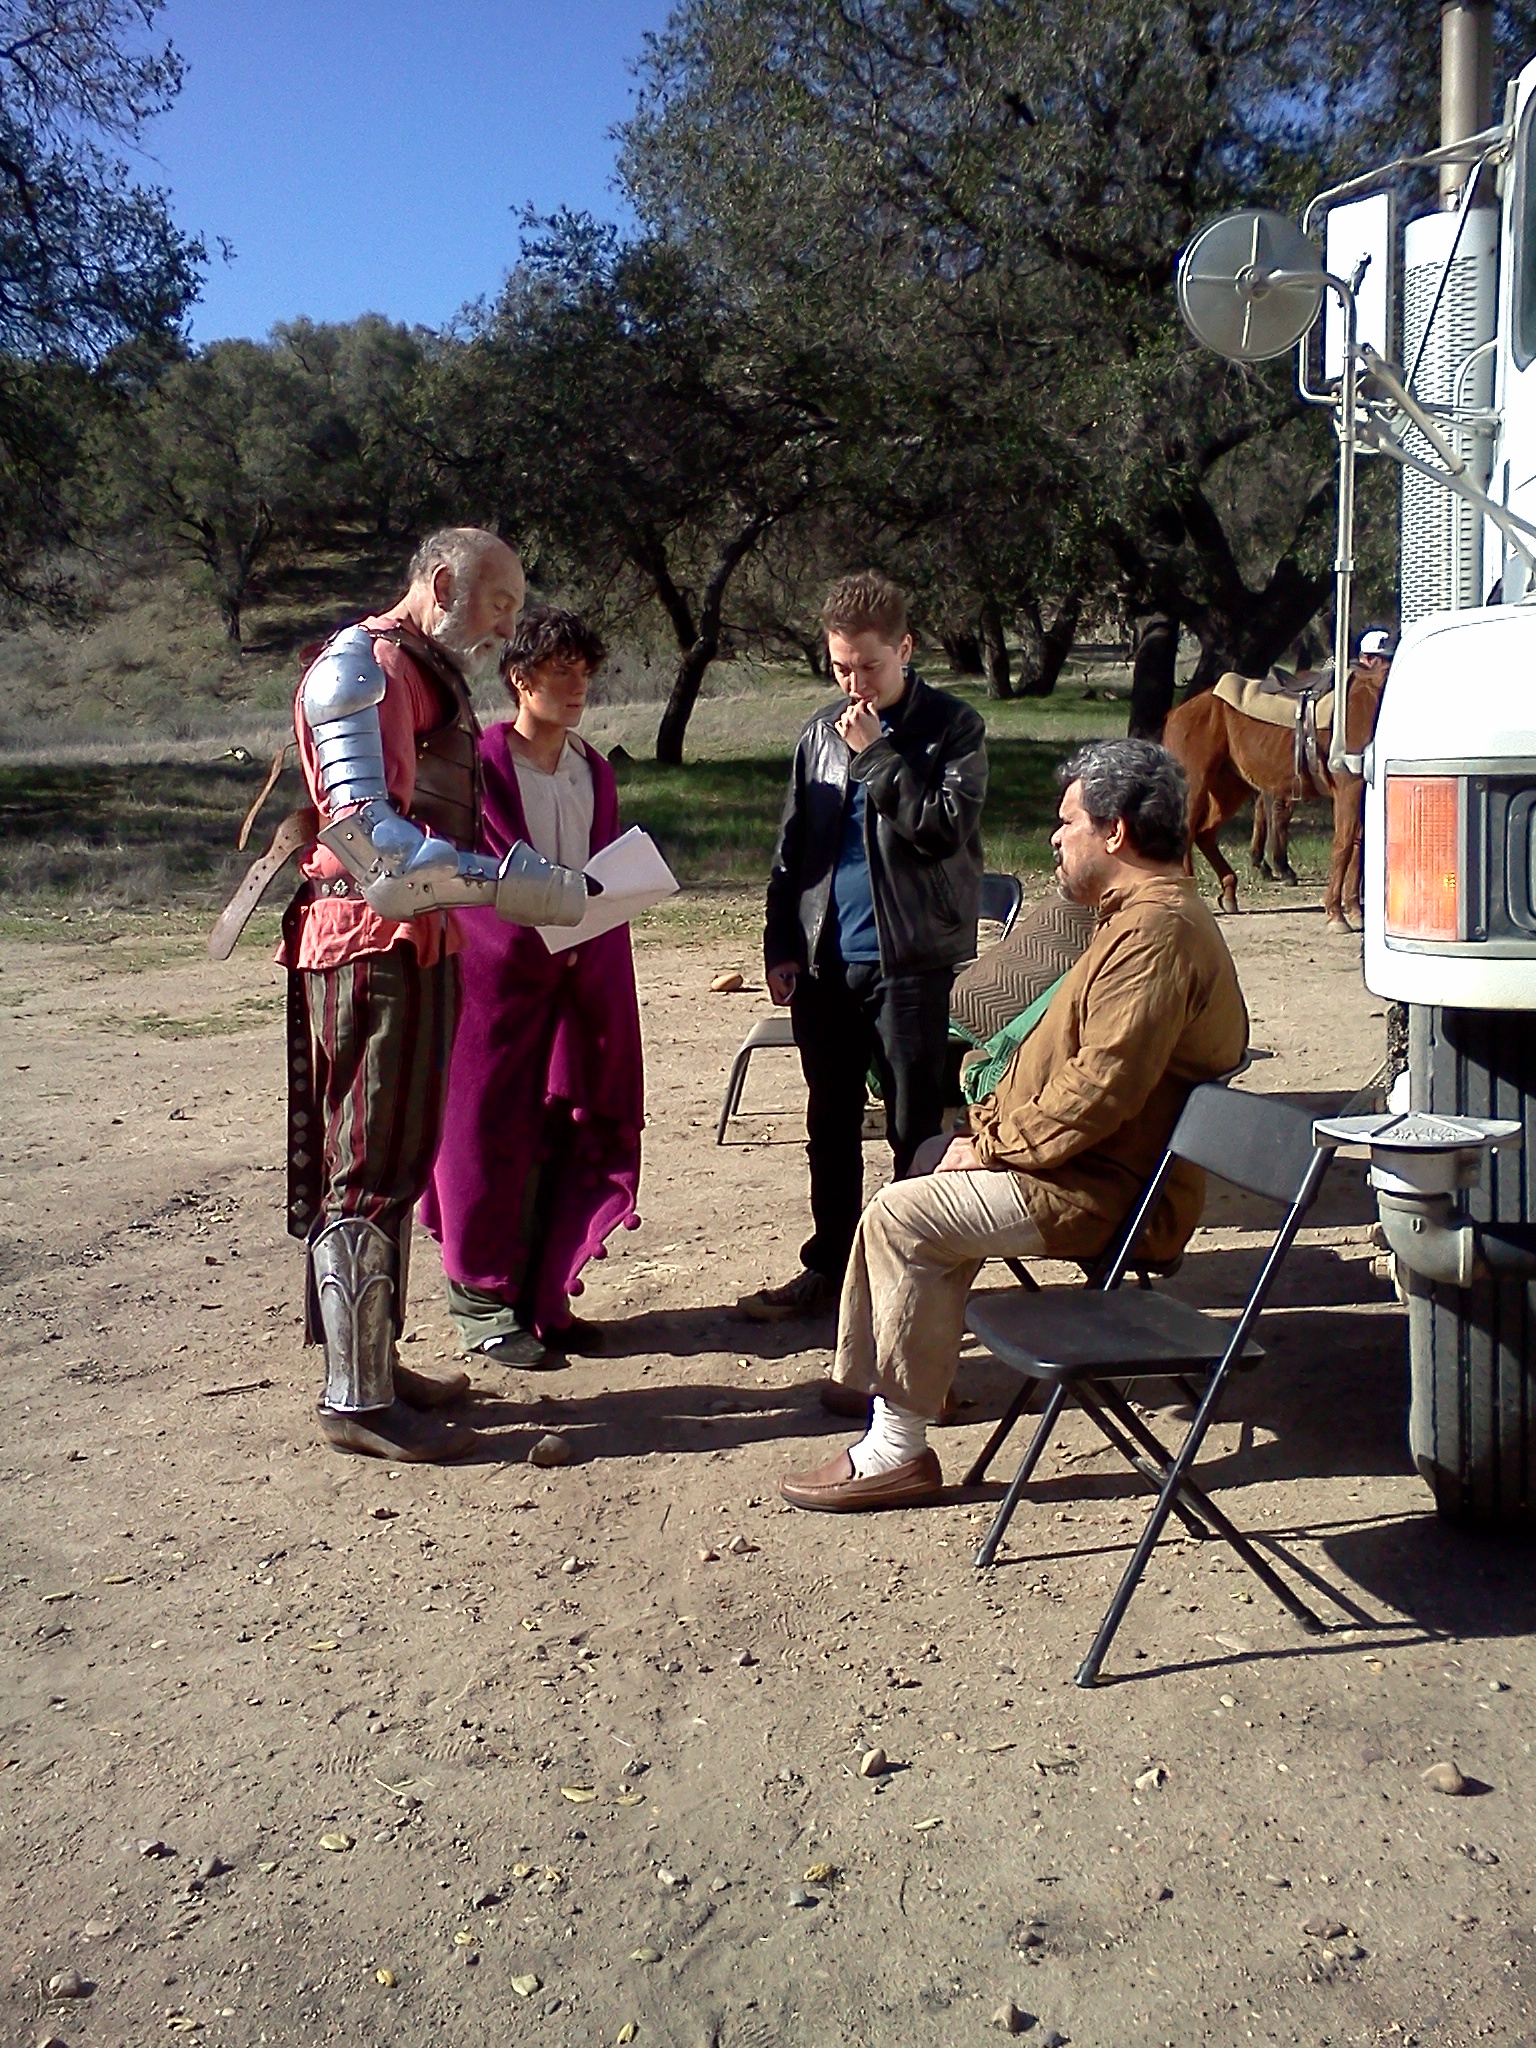 William Leon collaborating with Carmen Argenziano, Luis Guzman, and Director David Beier on the set of Don Quixote